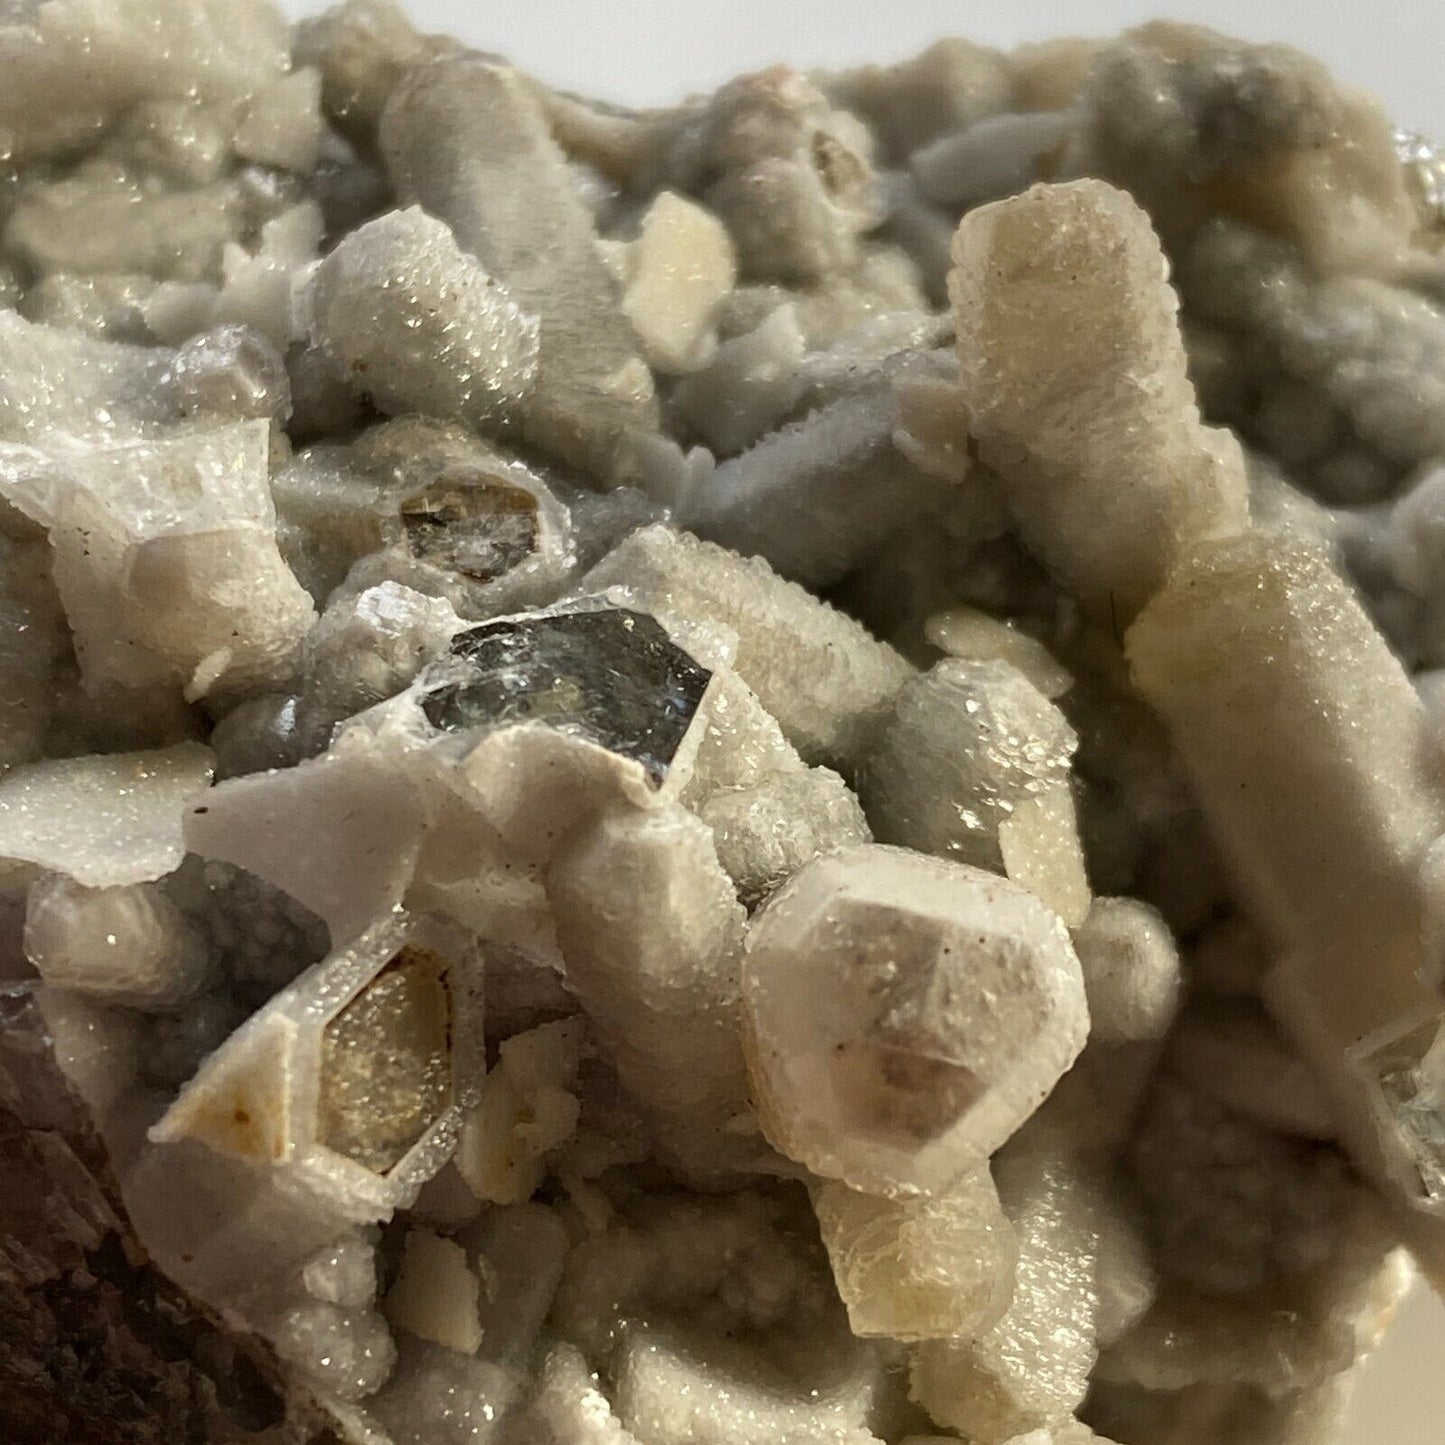 "NAILHEAD CALCITE" WITH FLUORITE FROM HEIGHTS QUARRY, CO DURHAM, ENGLAND MF6418